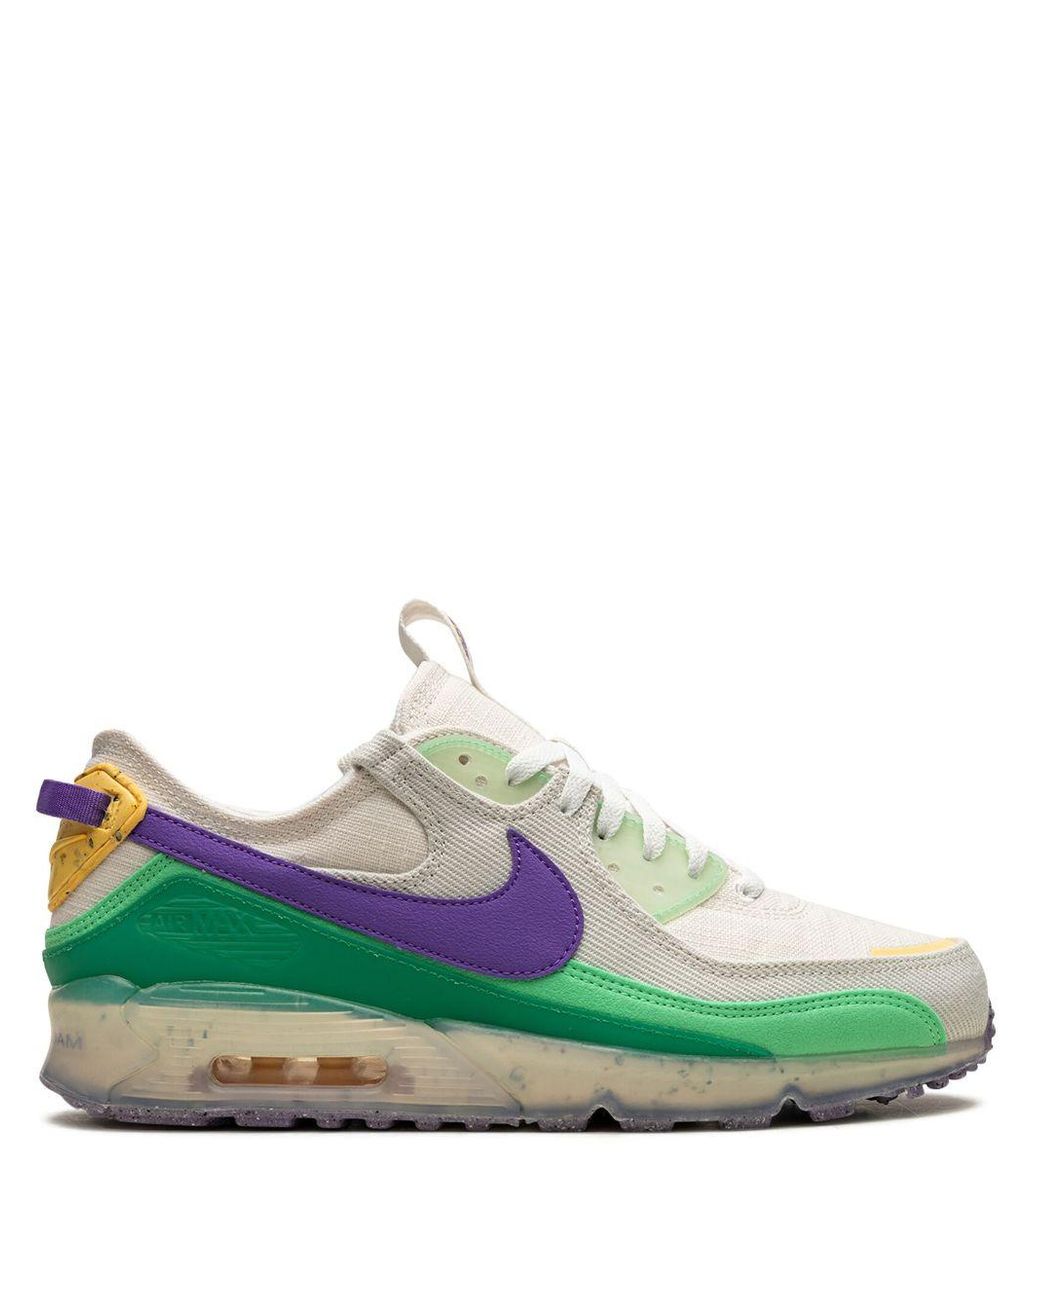 Nike Air Max Terrascape 90 "phanton/action Grape" Sneakers in Green | Lyst